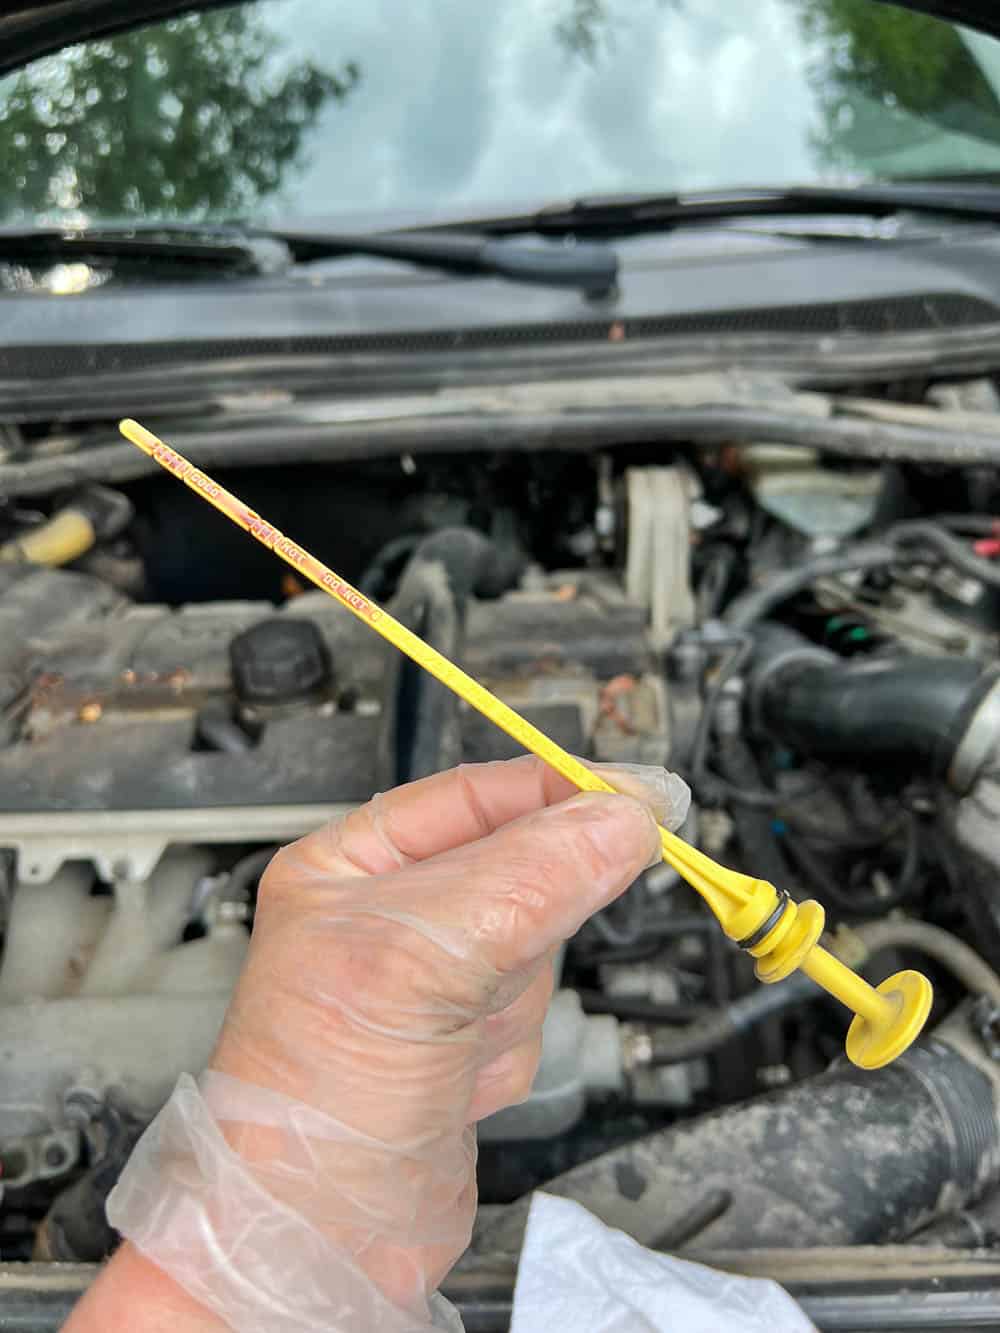 Hand holding up yellow transmission fluid dipstick prior to wiping it off.